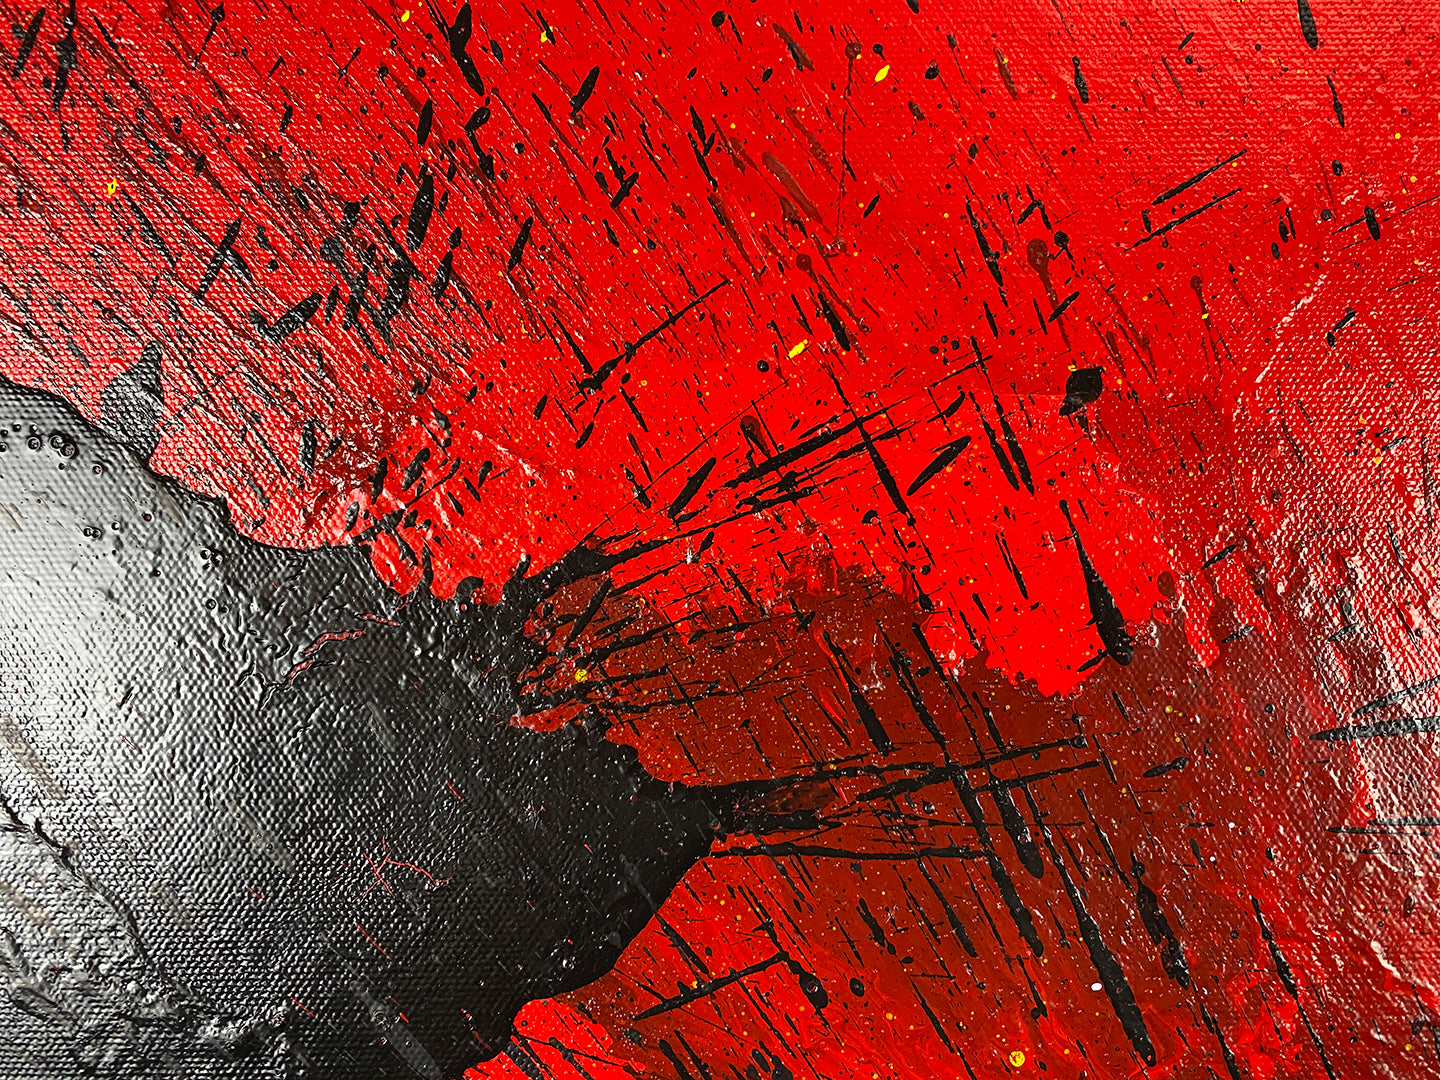 Abstract, expressionism, acrylic painting close-up 4. Exciting explosion of bright red, black, yellow and white on a Gallery-Wrapped canvas